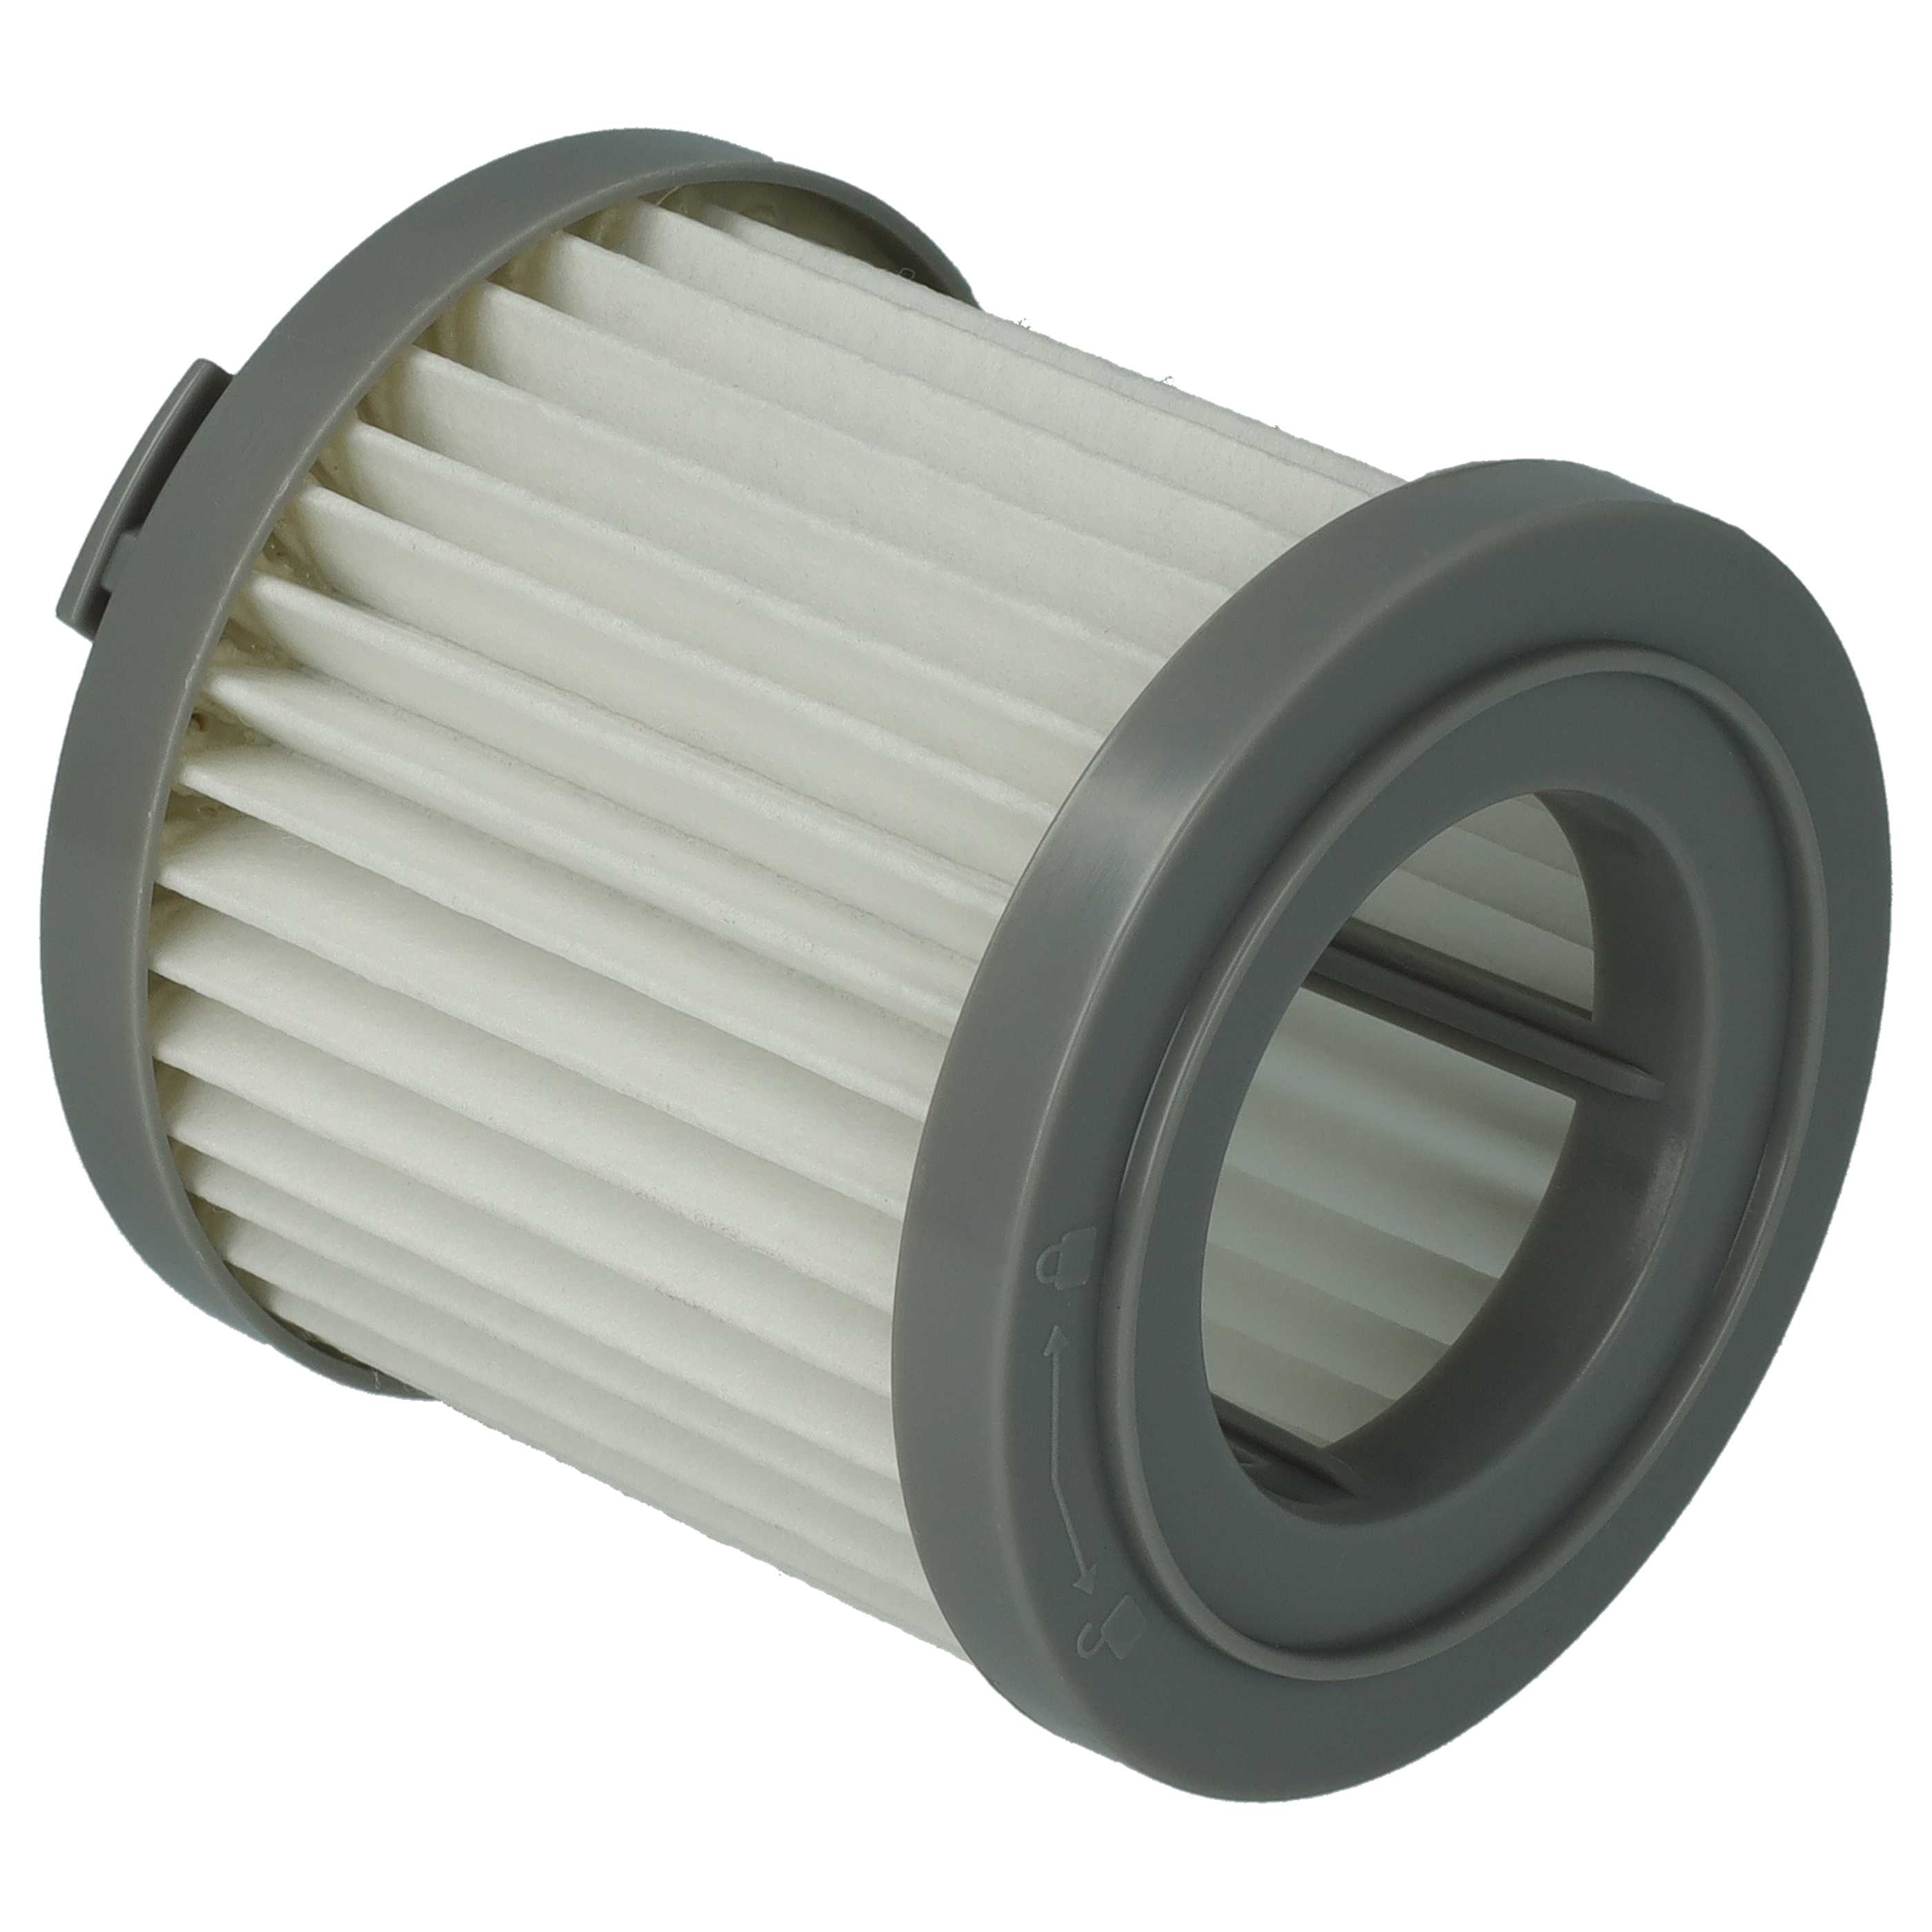 1x HEPA filter replaces AEG 4055453288 for AEGVacuum Cleaner, white / grey